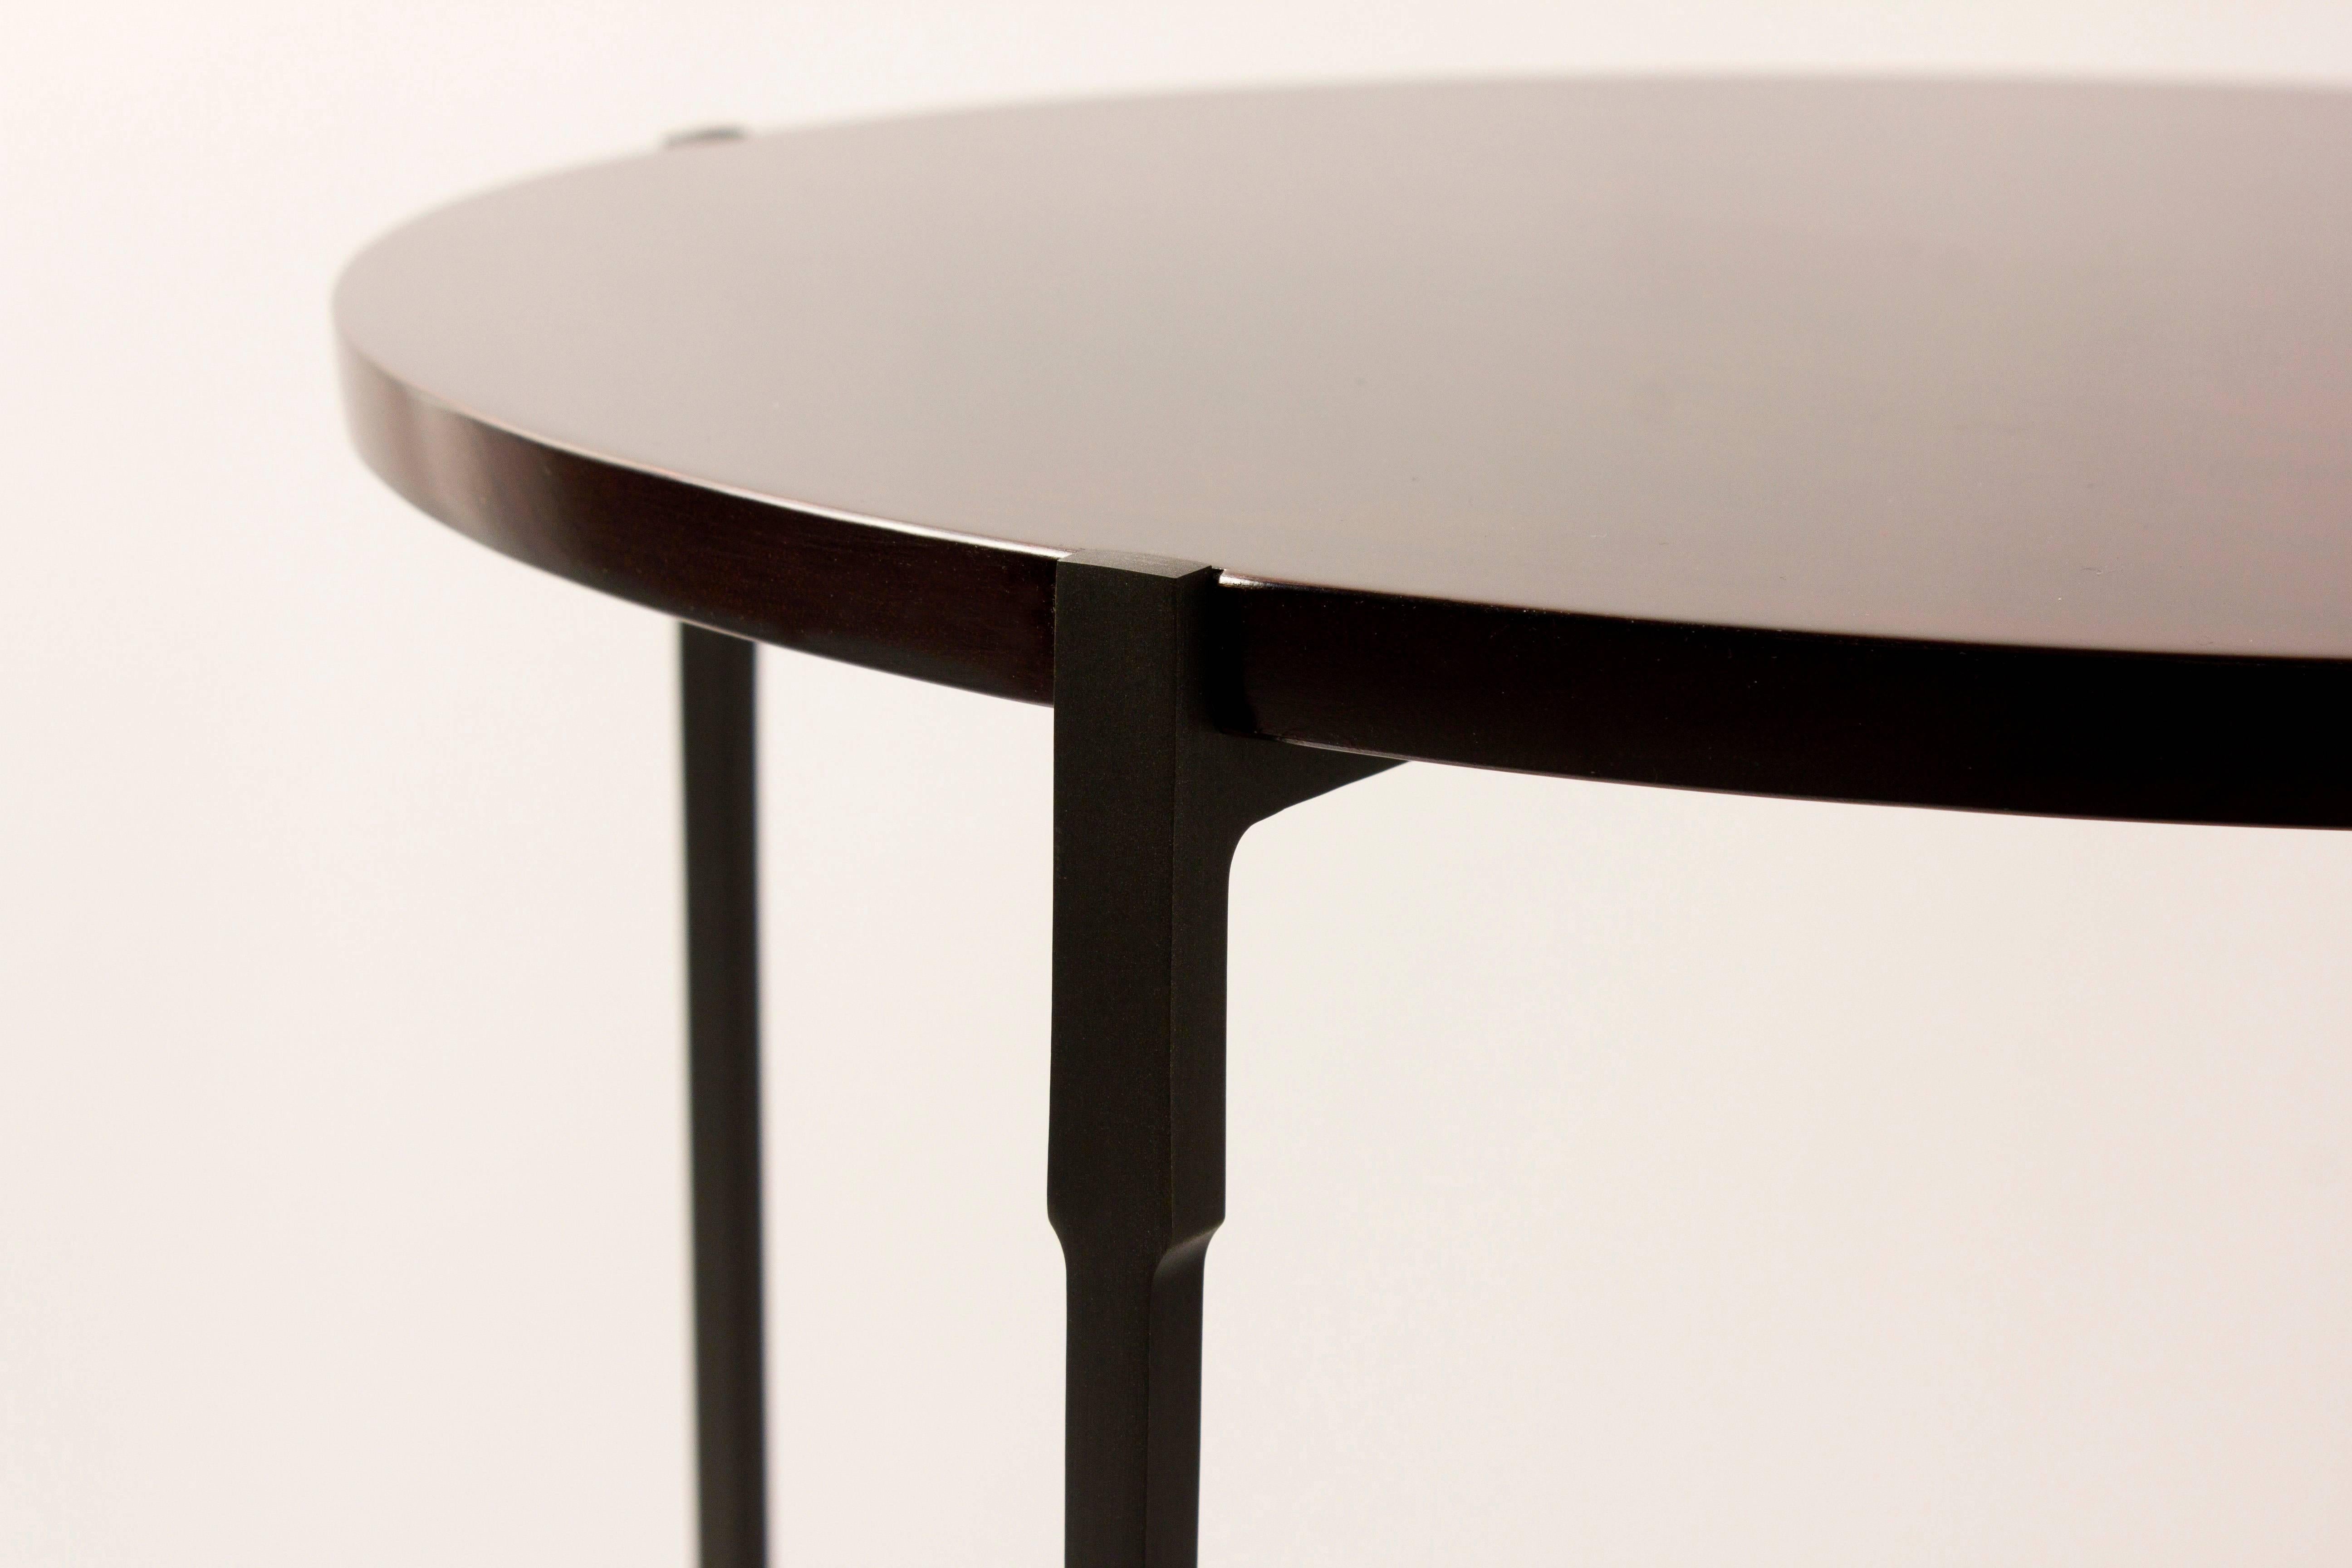 Bronze sculptured foot structure and glossy mahogany top round side table.
Dimensions: H 64 cm x D 46 cm.

 